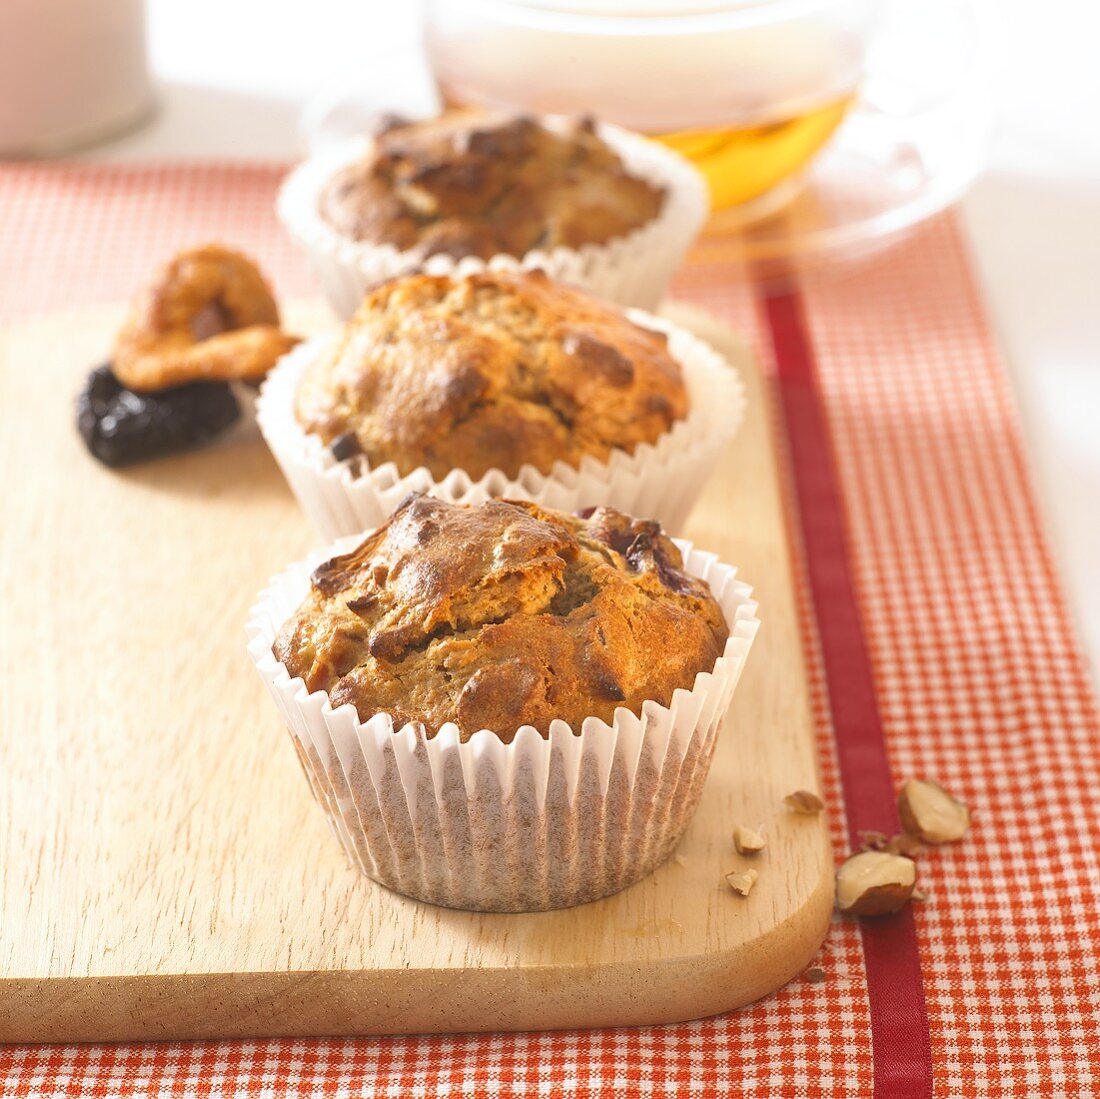 Wholemeal muffins with dried fruit in paper cases